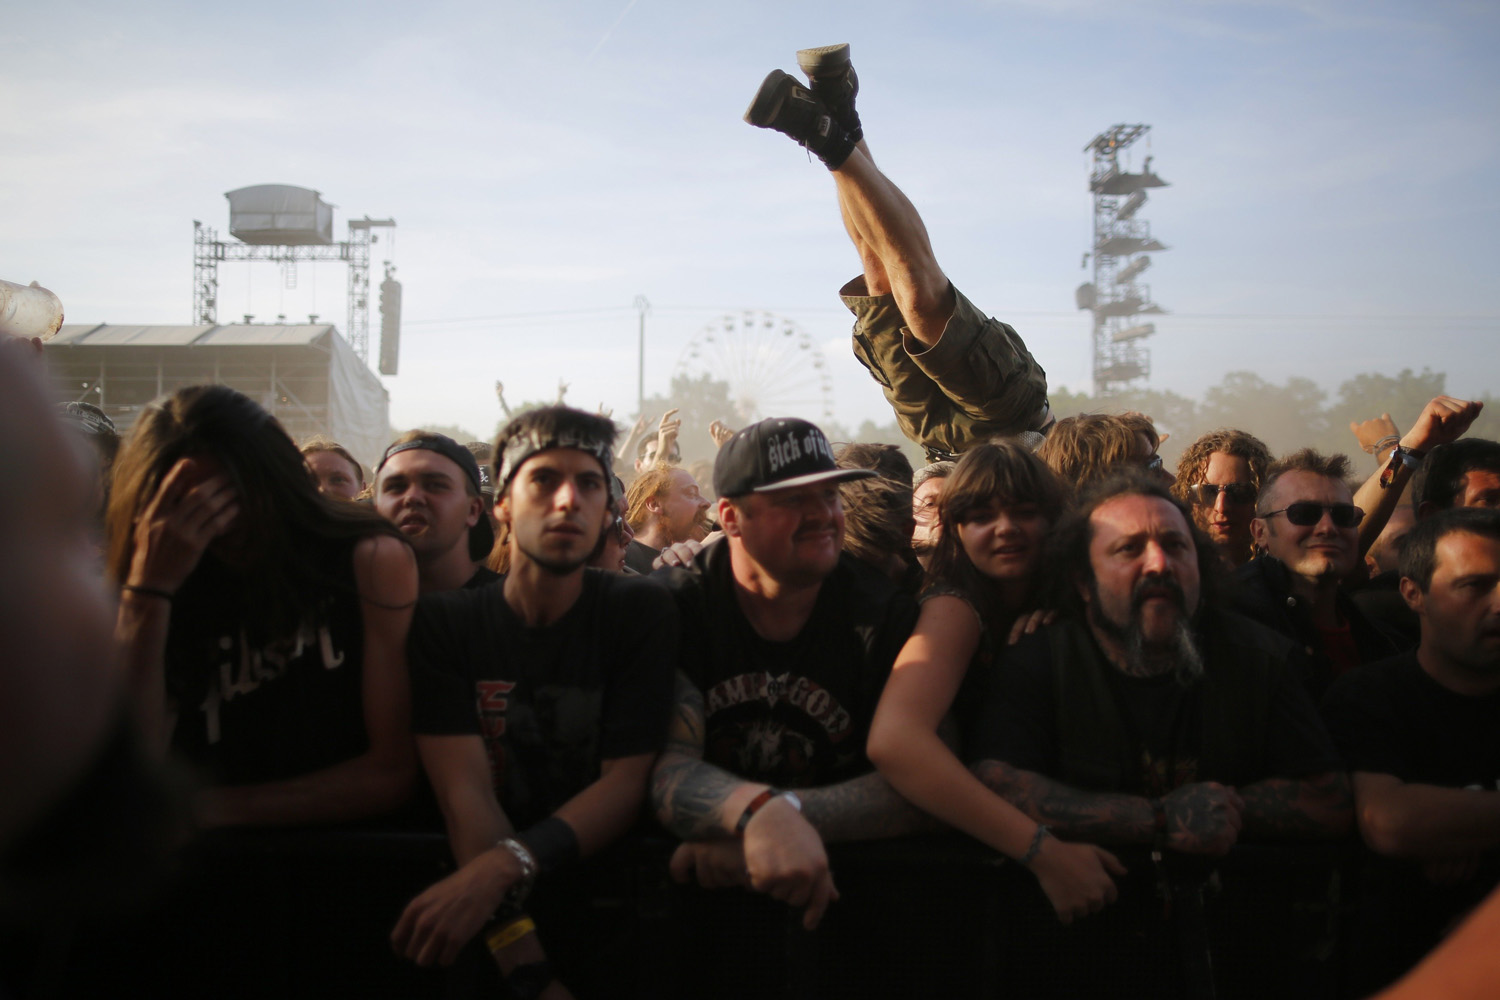 Festival-goers react during the Hellfest music Festival in Clisson